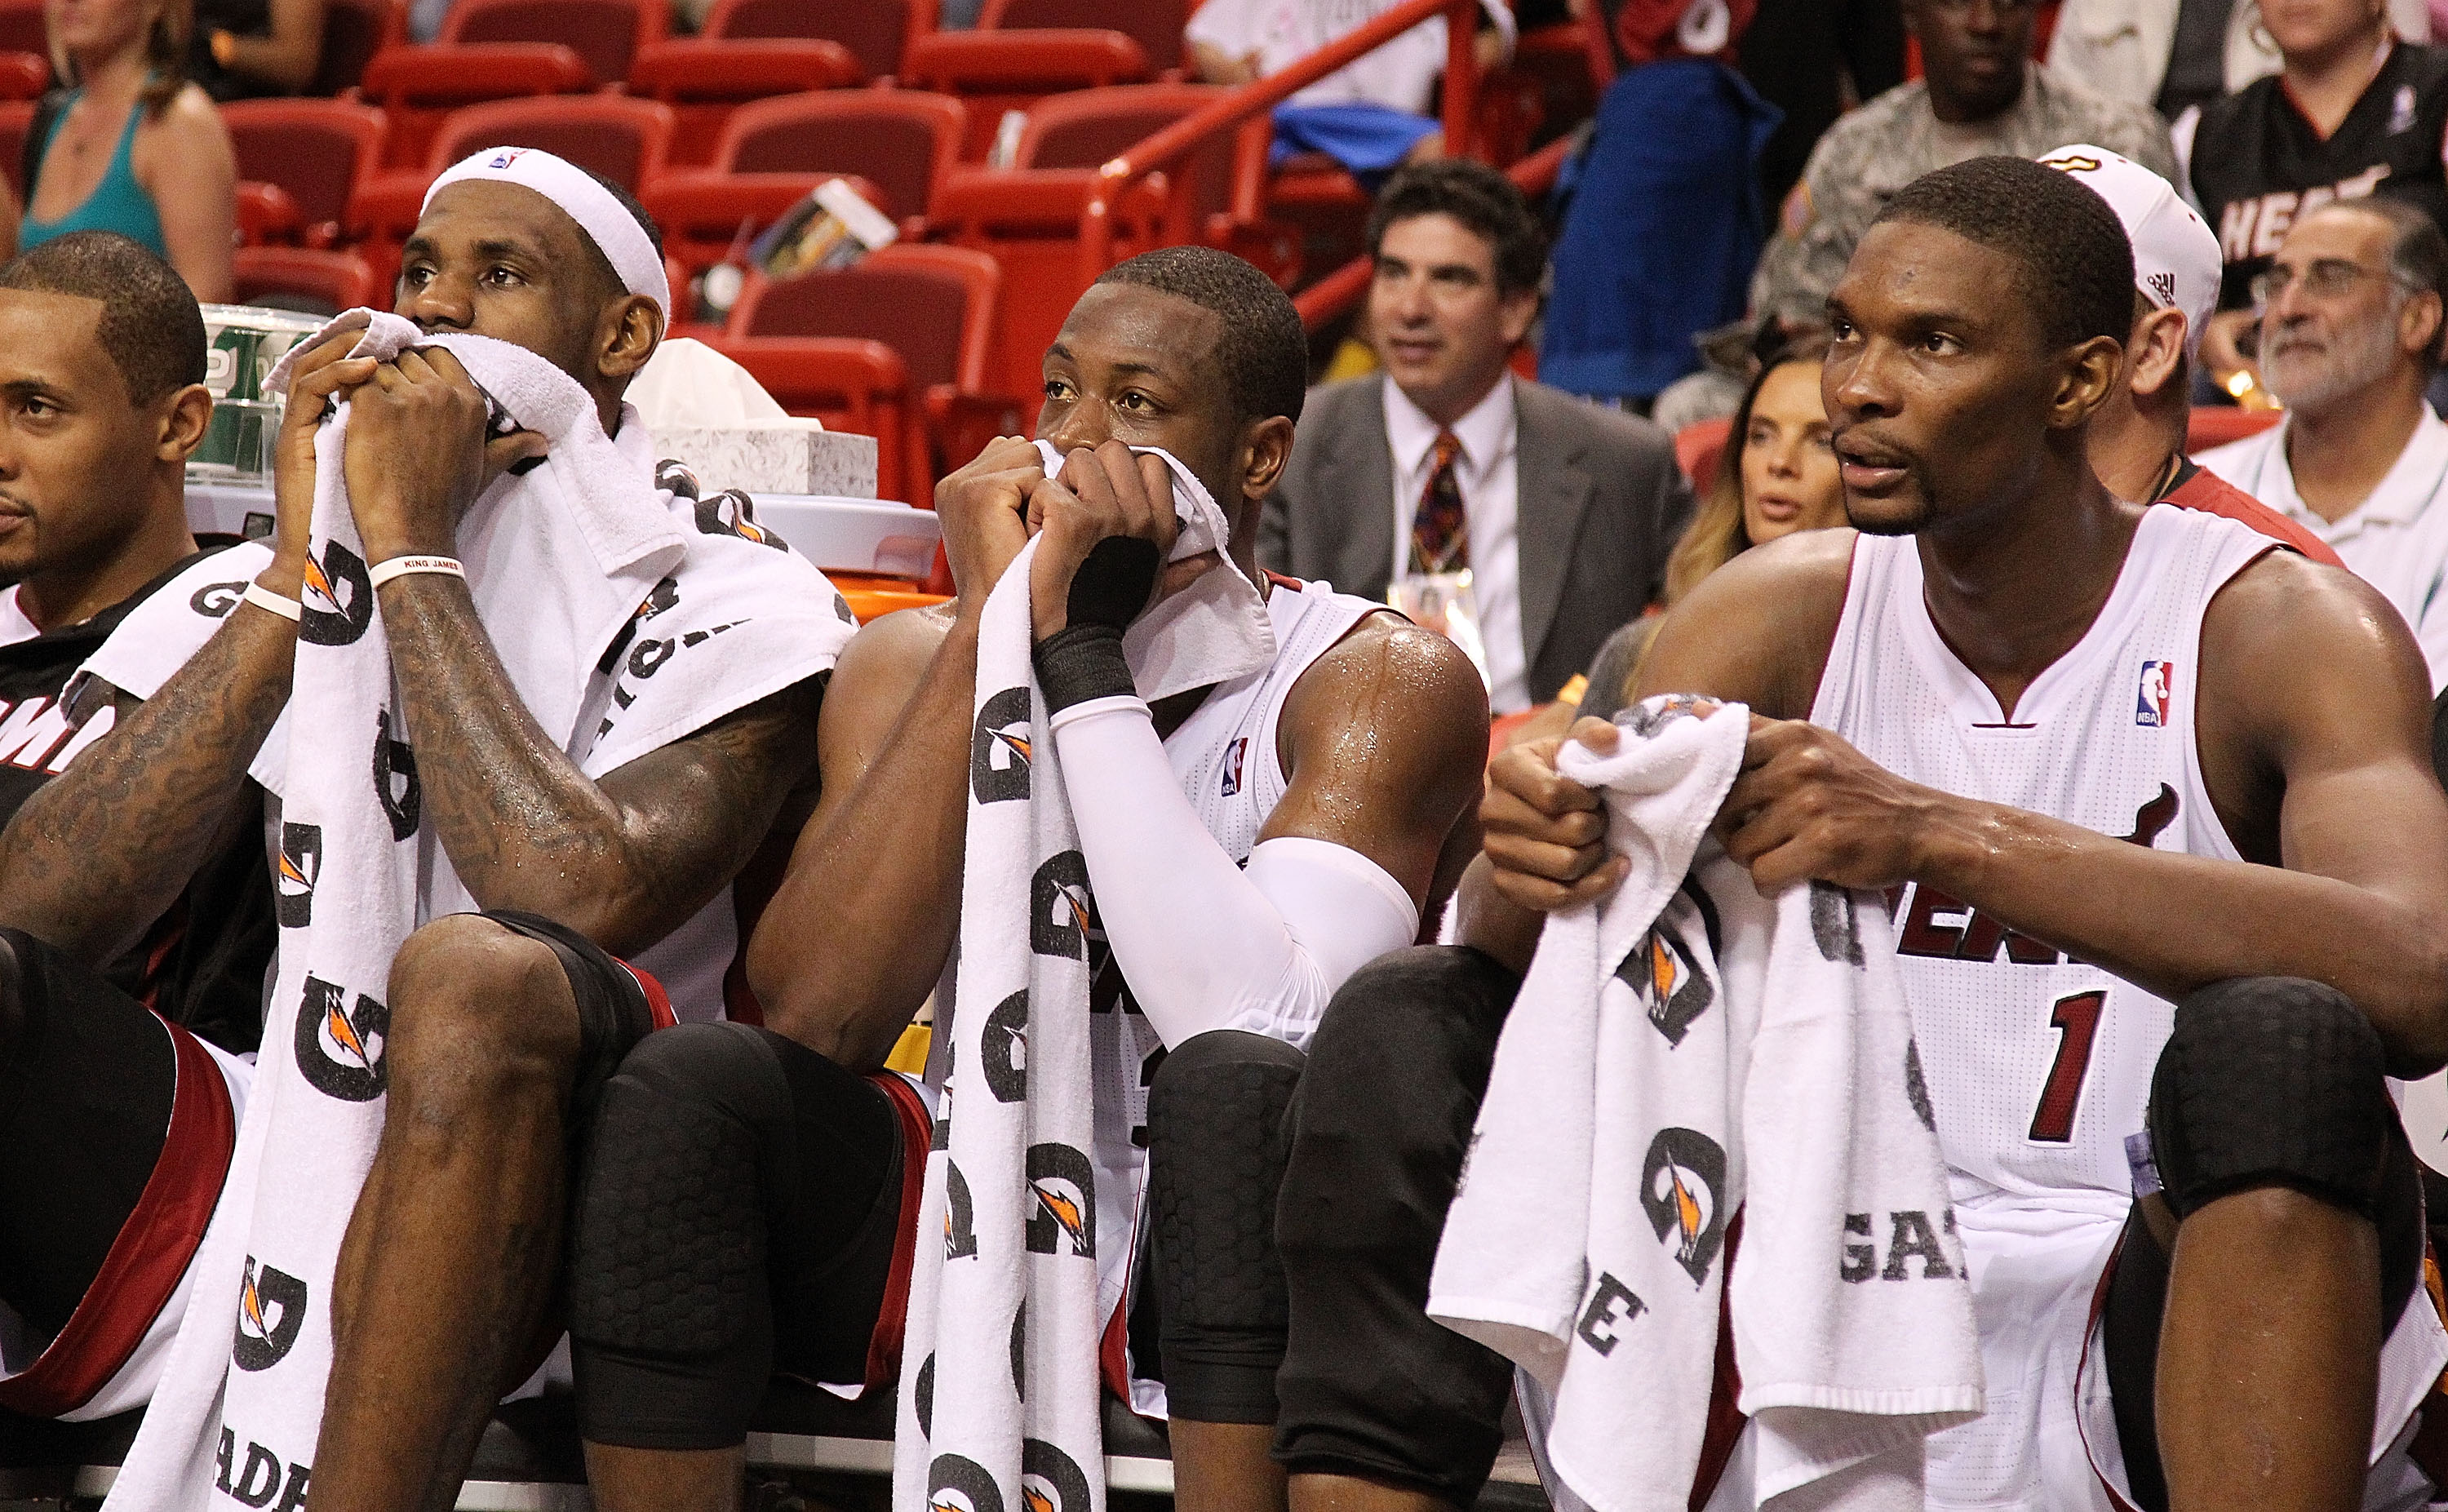 MIAMI, FL - NOVEMBER 29:  LeBron James #6, Dwyane Wade #3, and Chris Bosh #1 of the Miami Heat sit on the bench during a game against the Washington Wizards at American Airlines Arena on November 29, 2010 in Miami, Florida. NOTE TO USER: User expressly ac